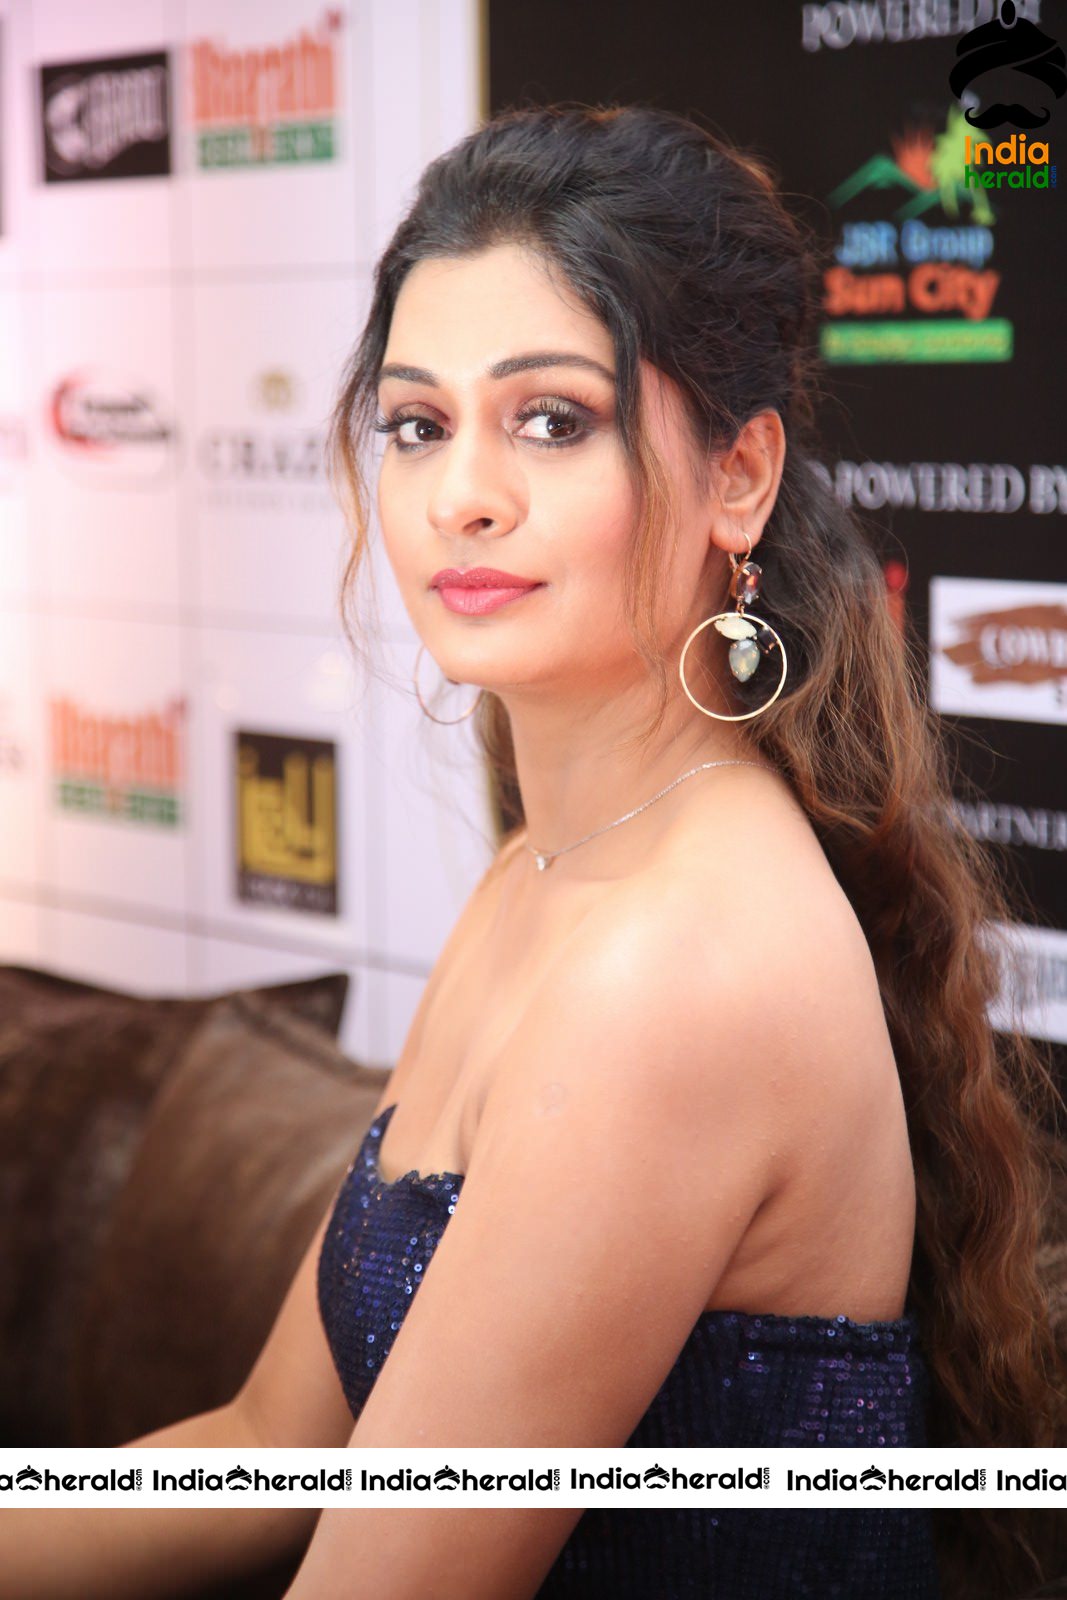 More Hot and Sexy Photos Of Payal Rajput From The Award Show Set 5